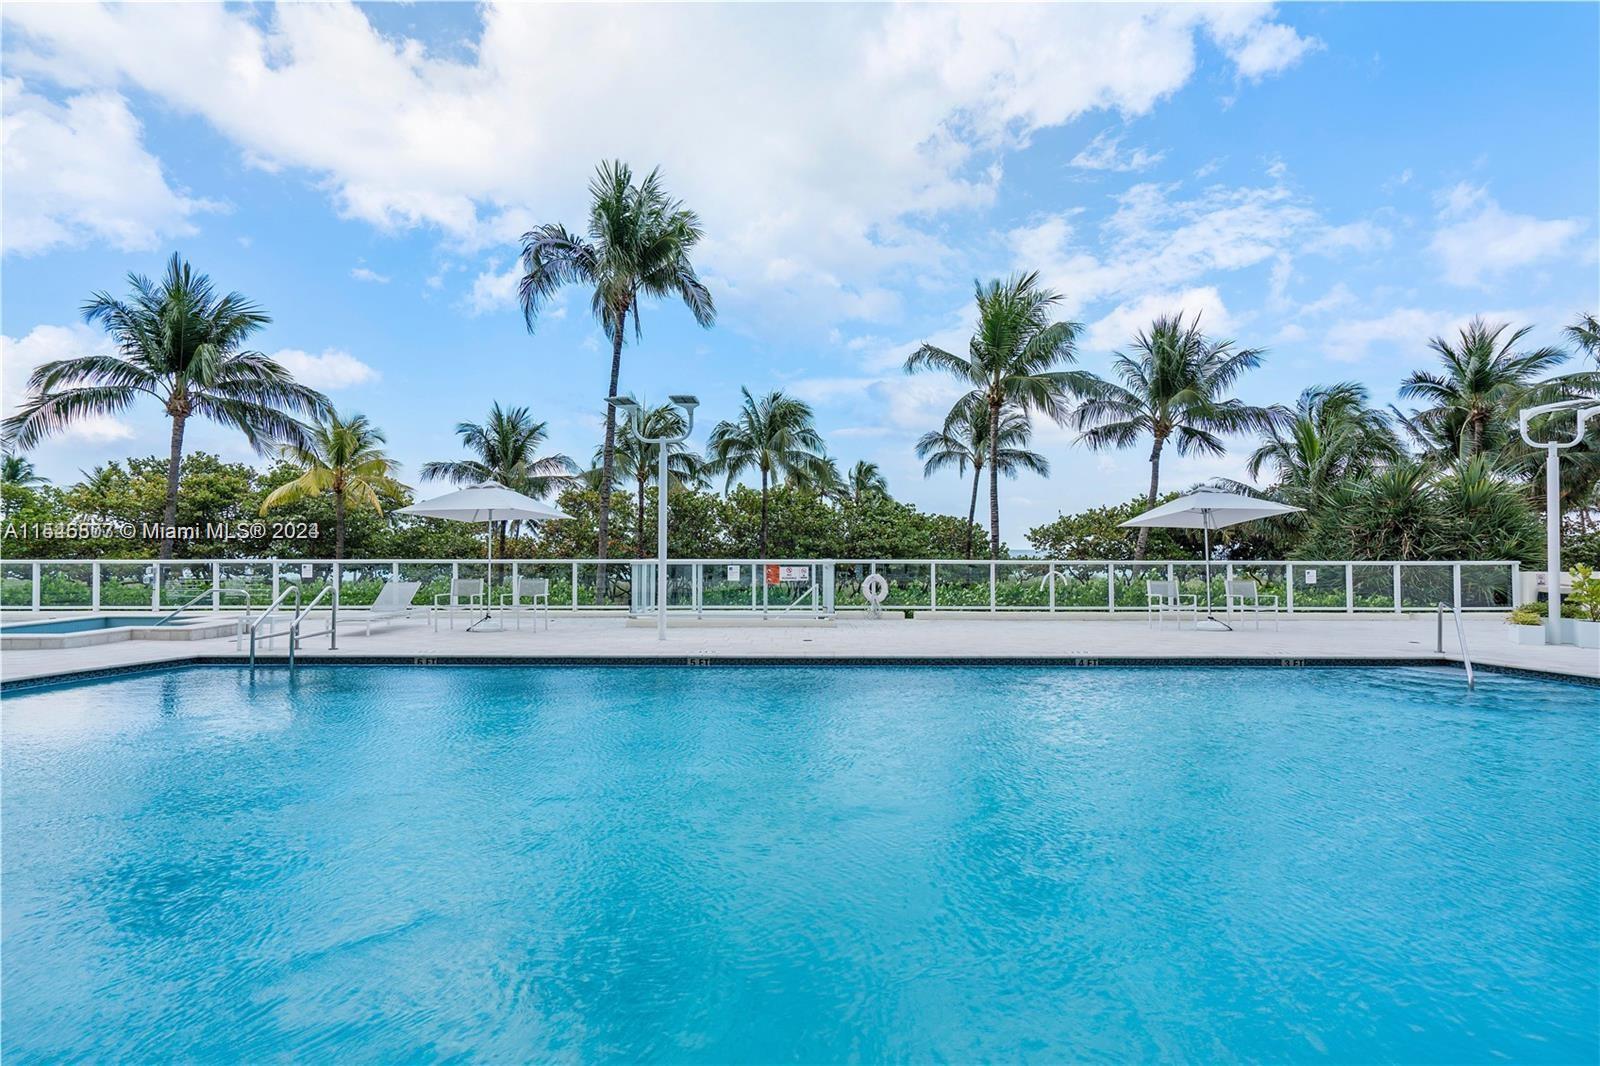 Spectacular oceanfront apartment in the most magnificent area of Bal Harbour!
This 2 bedrooms 2 bathrooms features remodeled bathrooms and kitchen and has an oceanview from every room.
Located close to the Mall of Bal Harbour ,Publix,place of worships and restaurants , the building has 24 hrs security , a pool, jacuzzi and a gym.
WiFi and cable included in rent,easy to show.